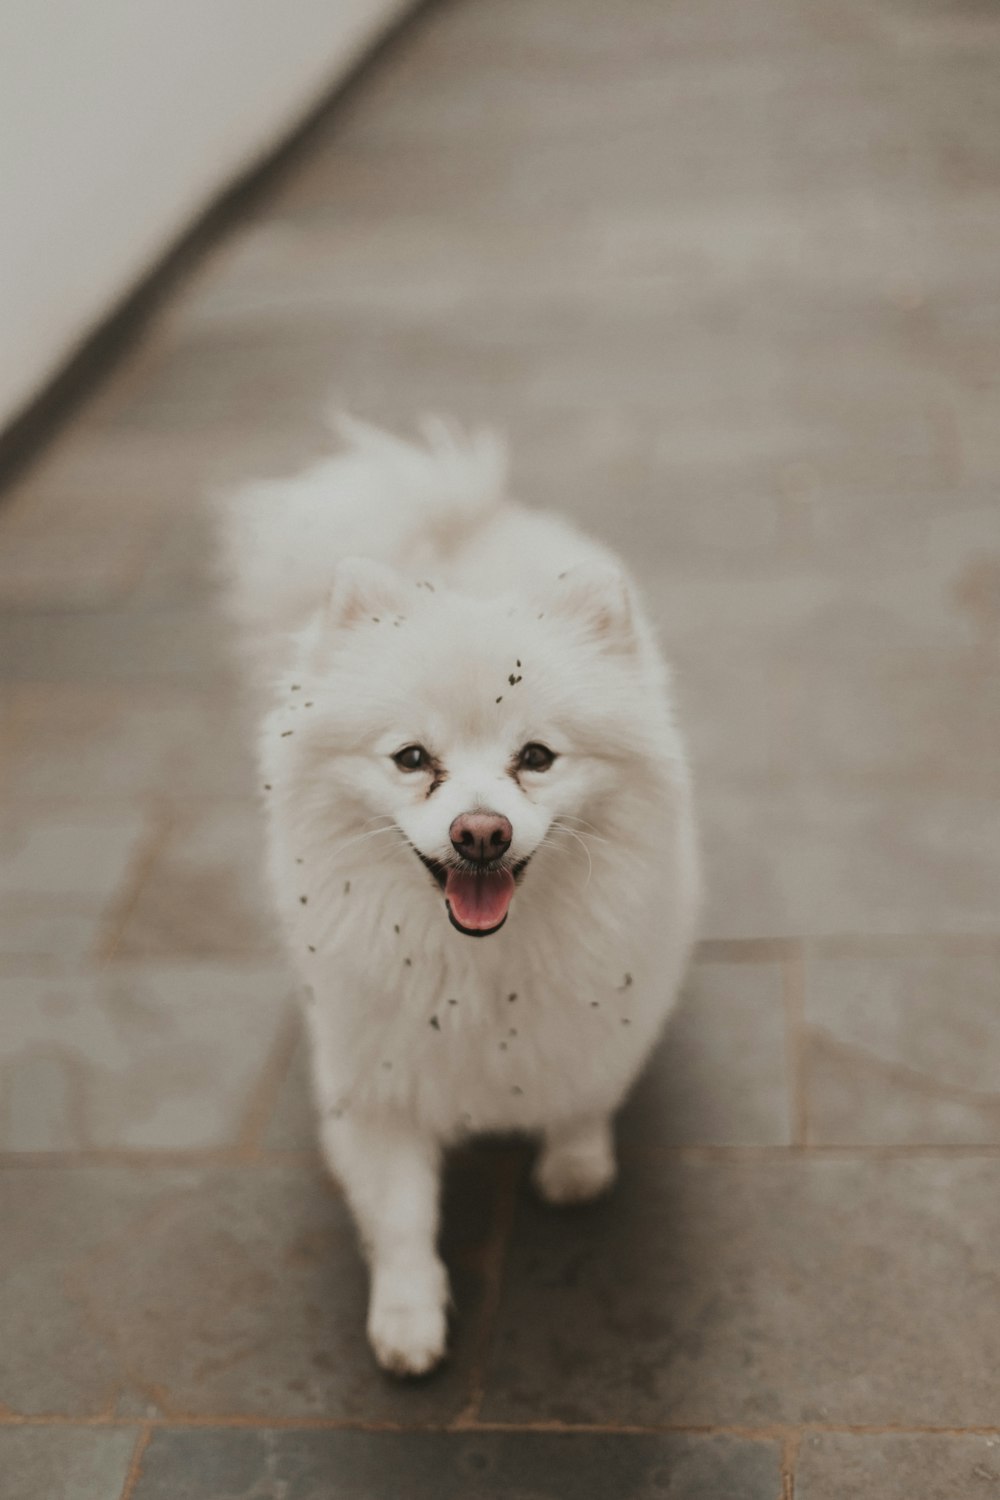 a small white dog standing on a tile floor